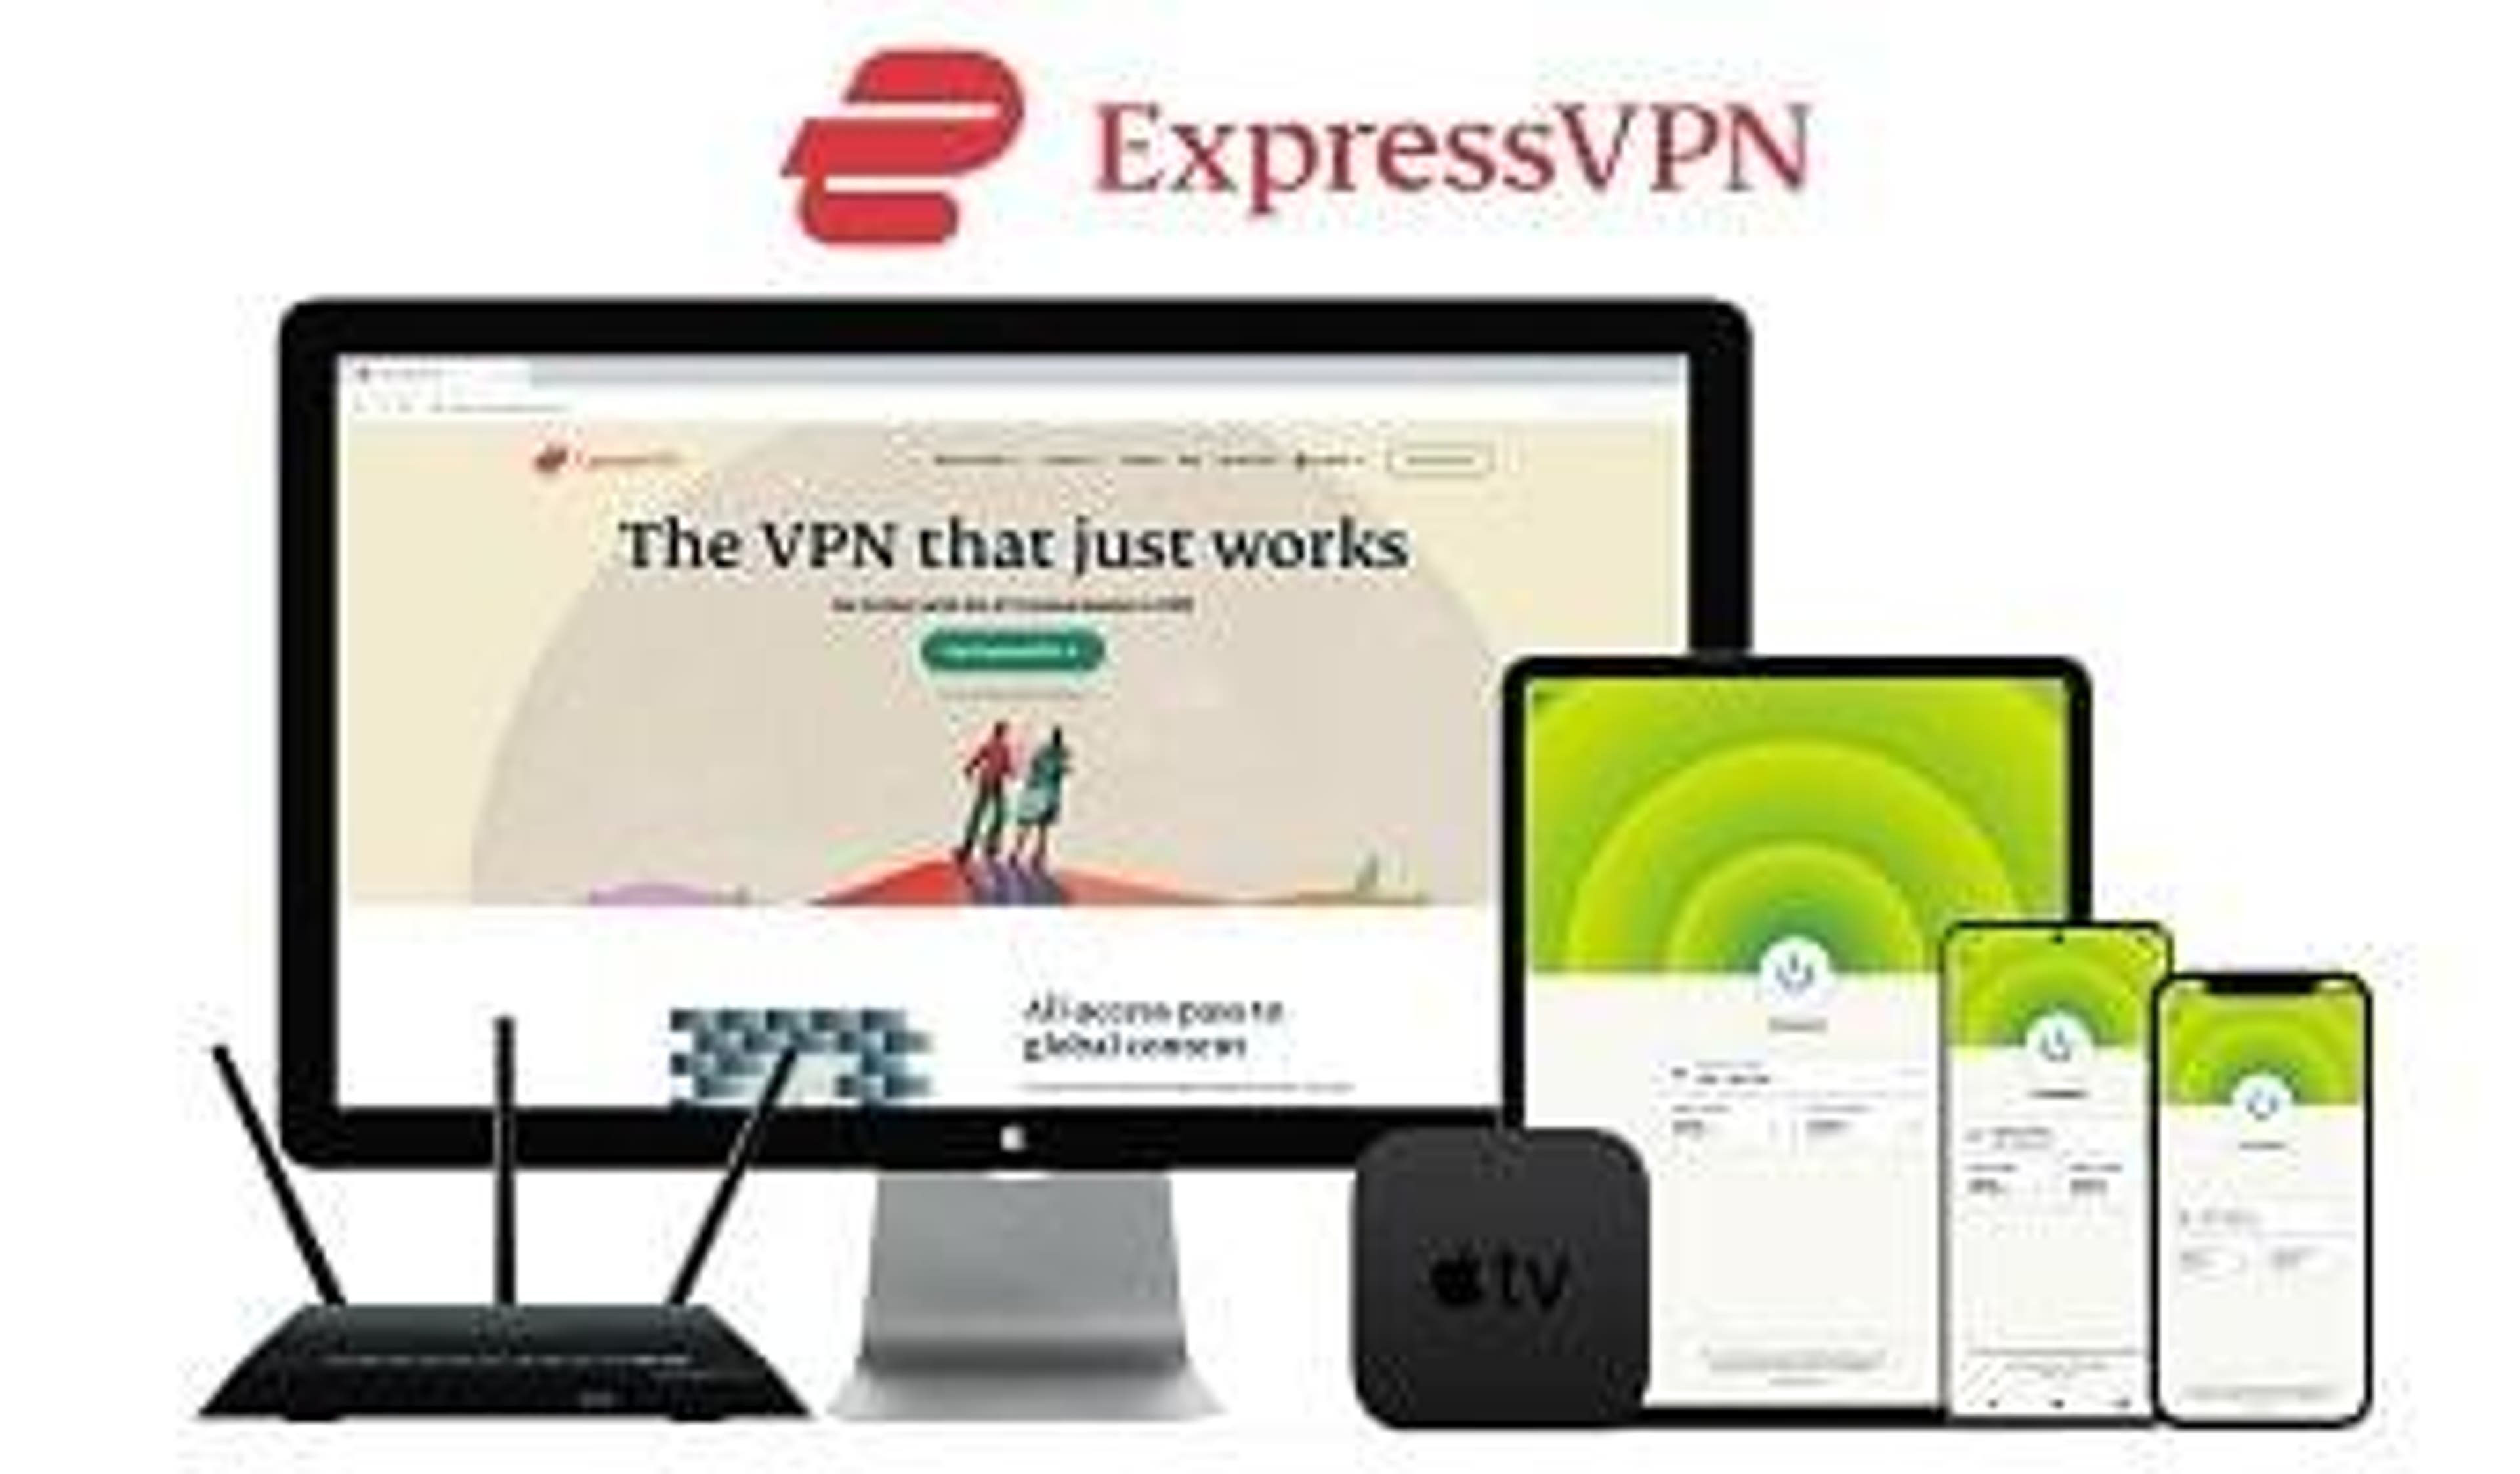  A Mac, tablet, Apple & Android Smartphone with ExpressVPN open besides a TV Box, Internet Router & the ExpressVPN logo 